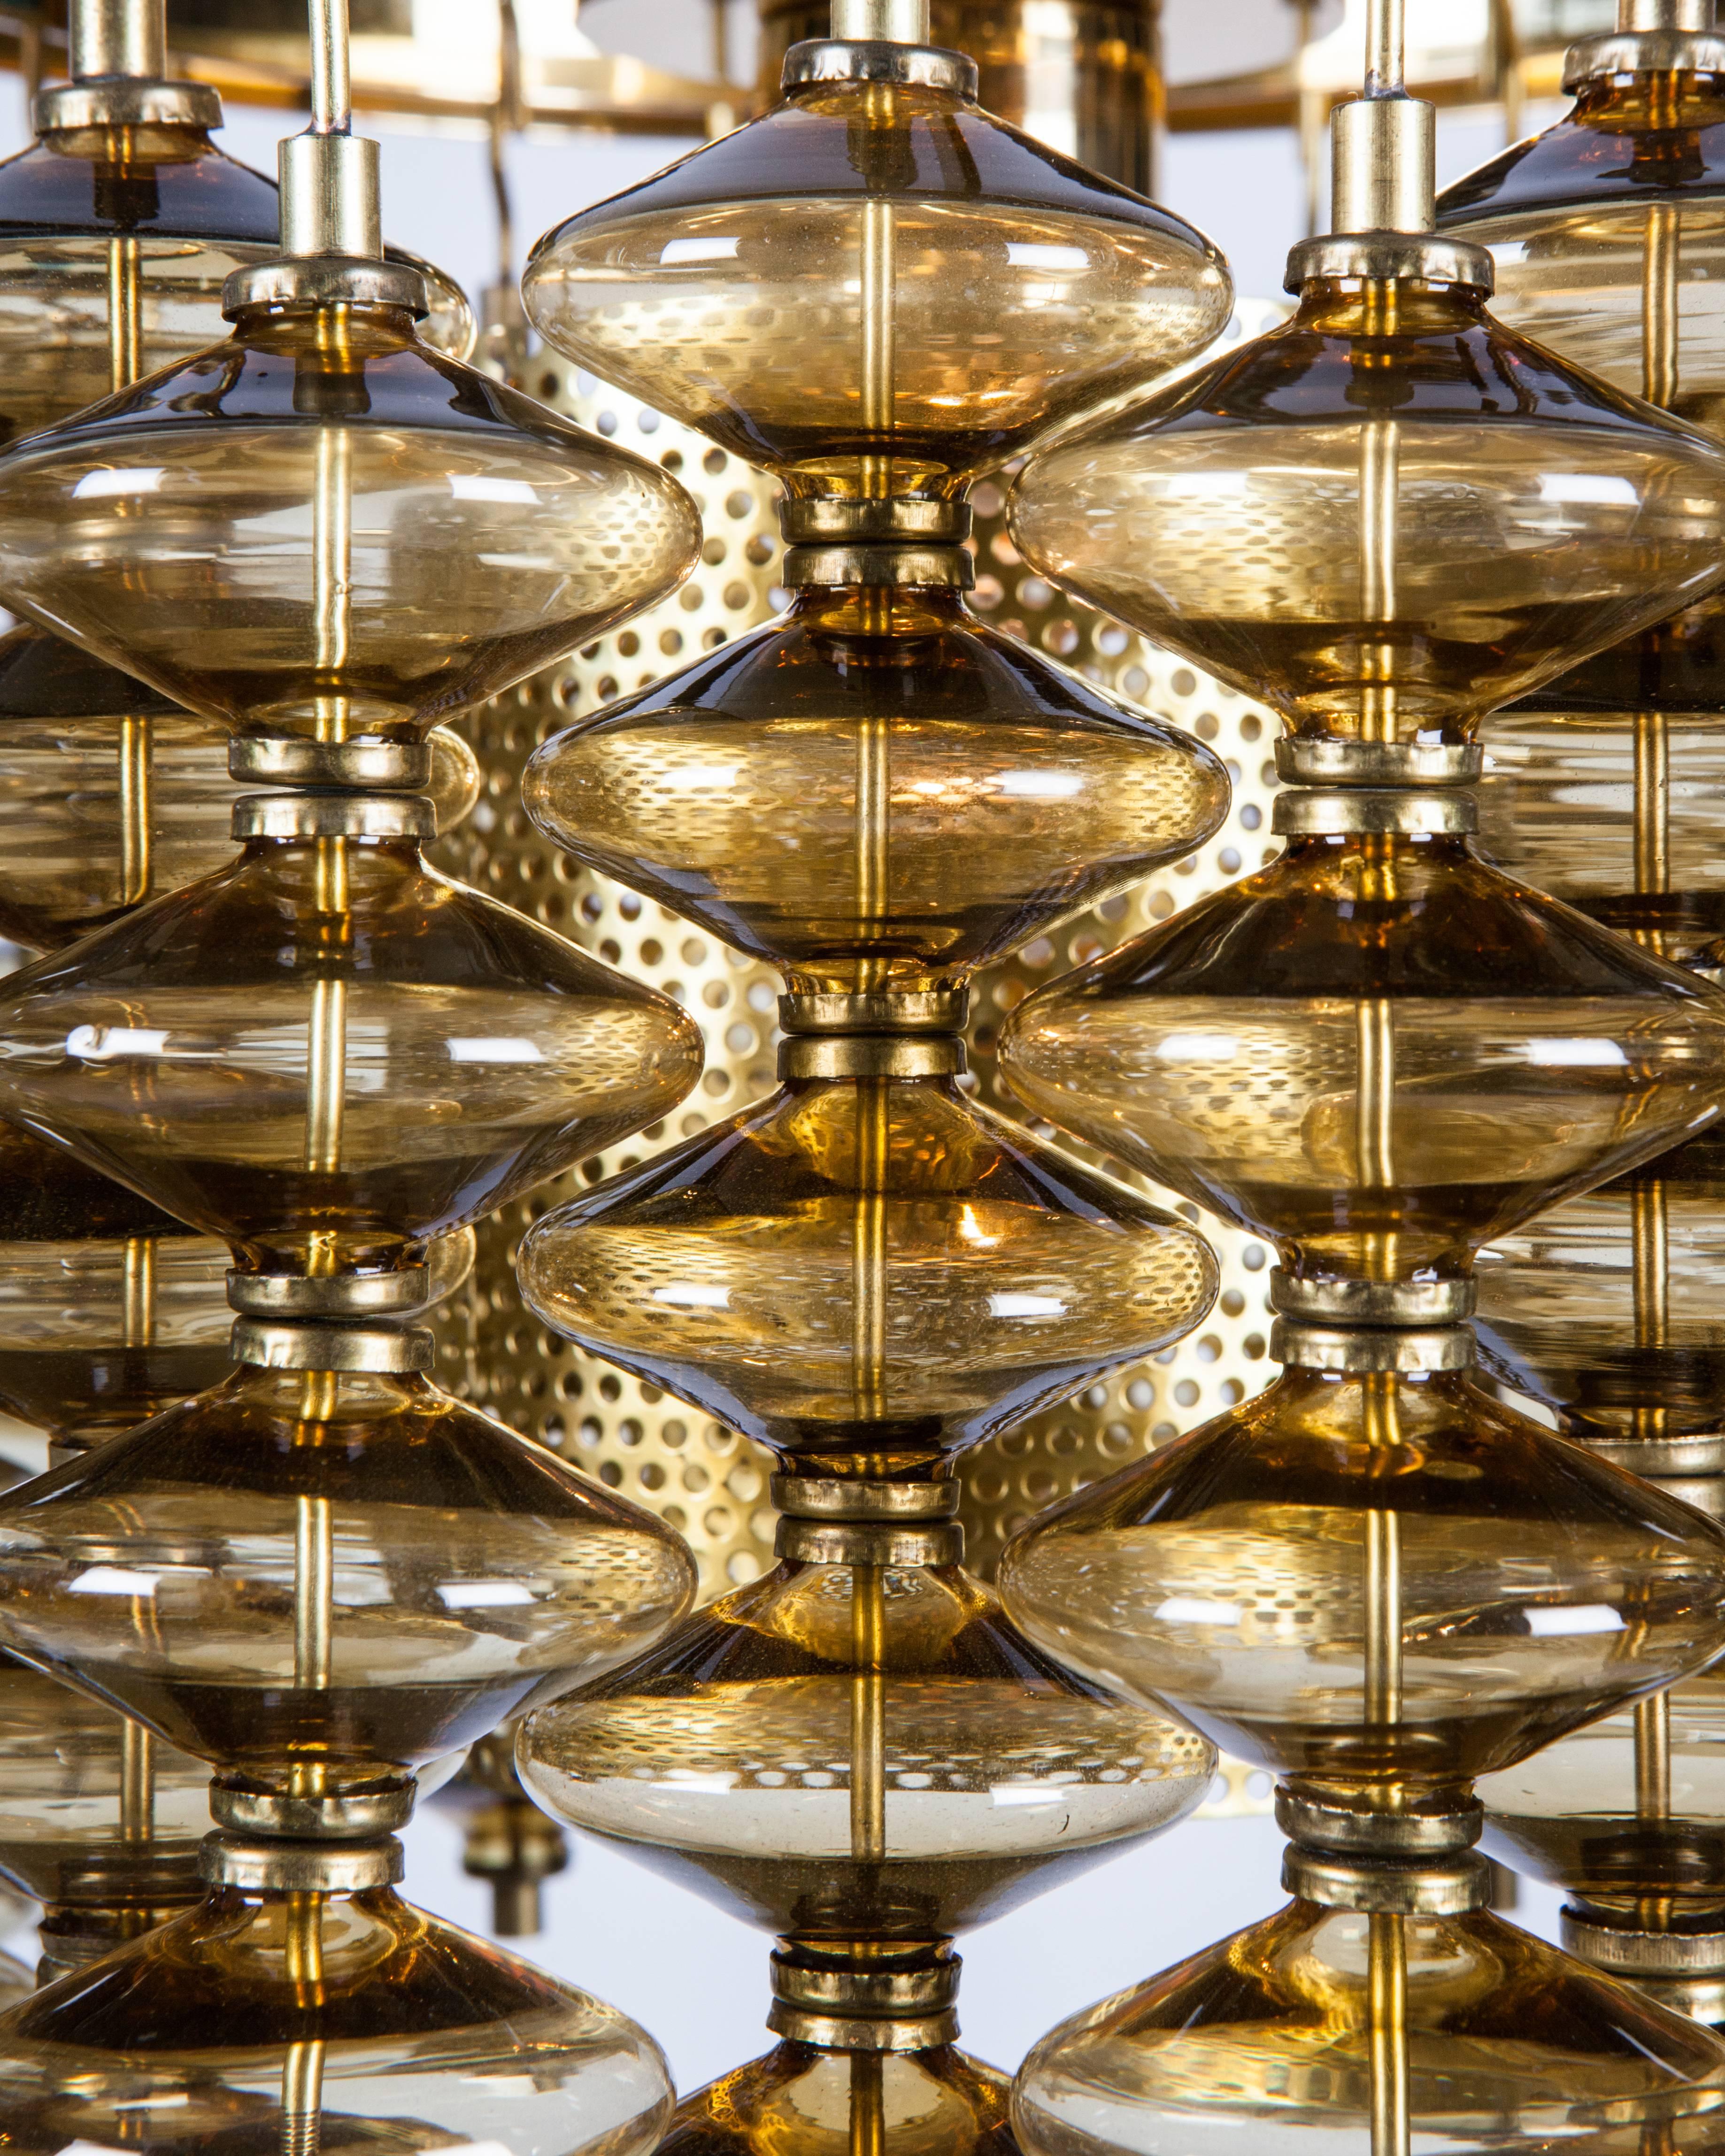 AHL4031

A circular chandelier with cascading amber glass on a richly hued lacquered brass frame with a central cylindrical diffuser. Signed by the Swedish maker Hans-Agne Jakobsson, Markaryd Sweden. Due to the antique nature of this fixture, there